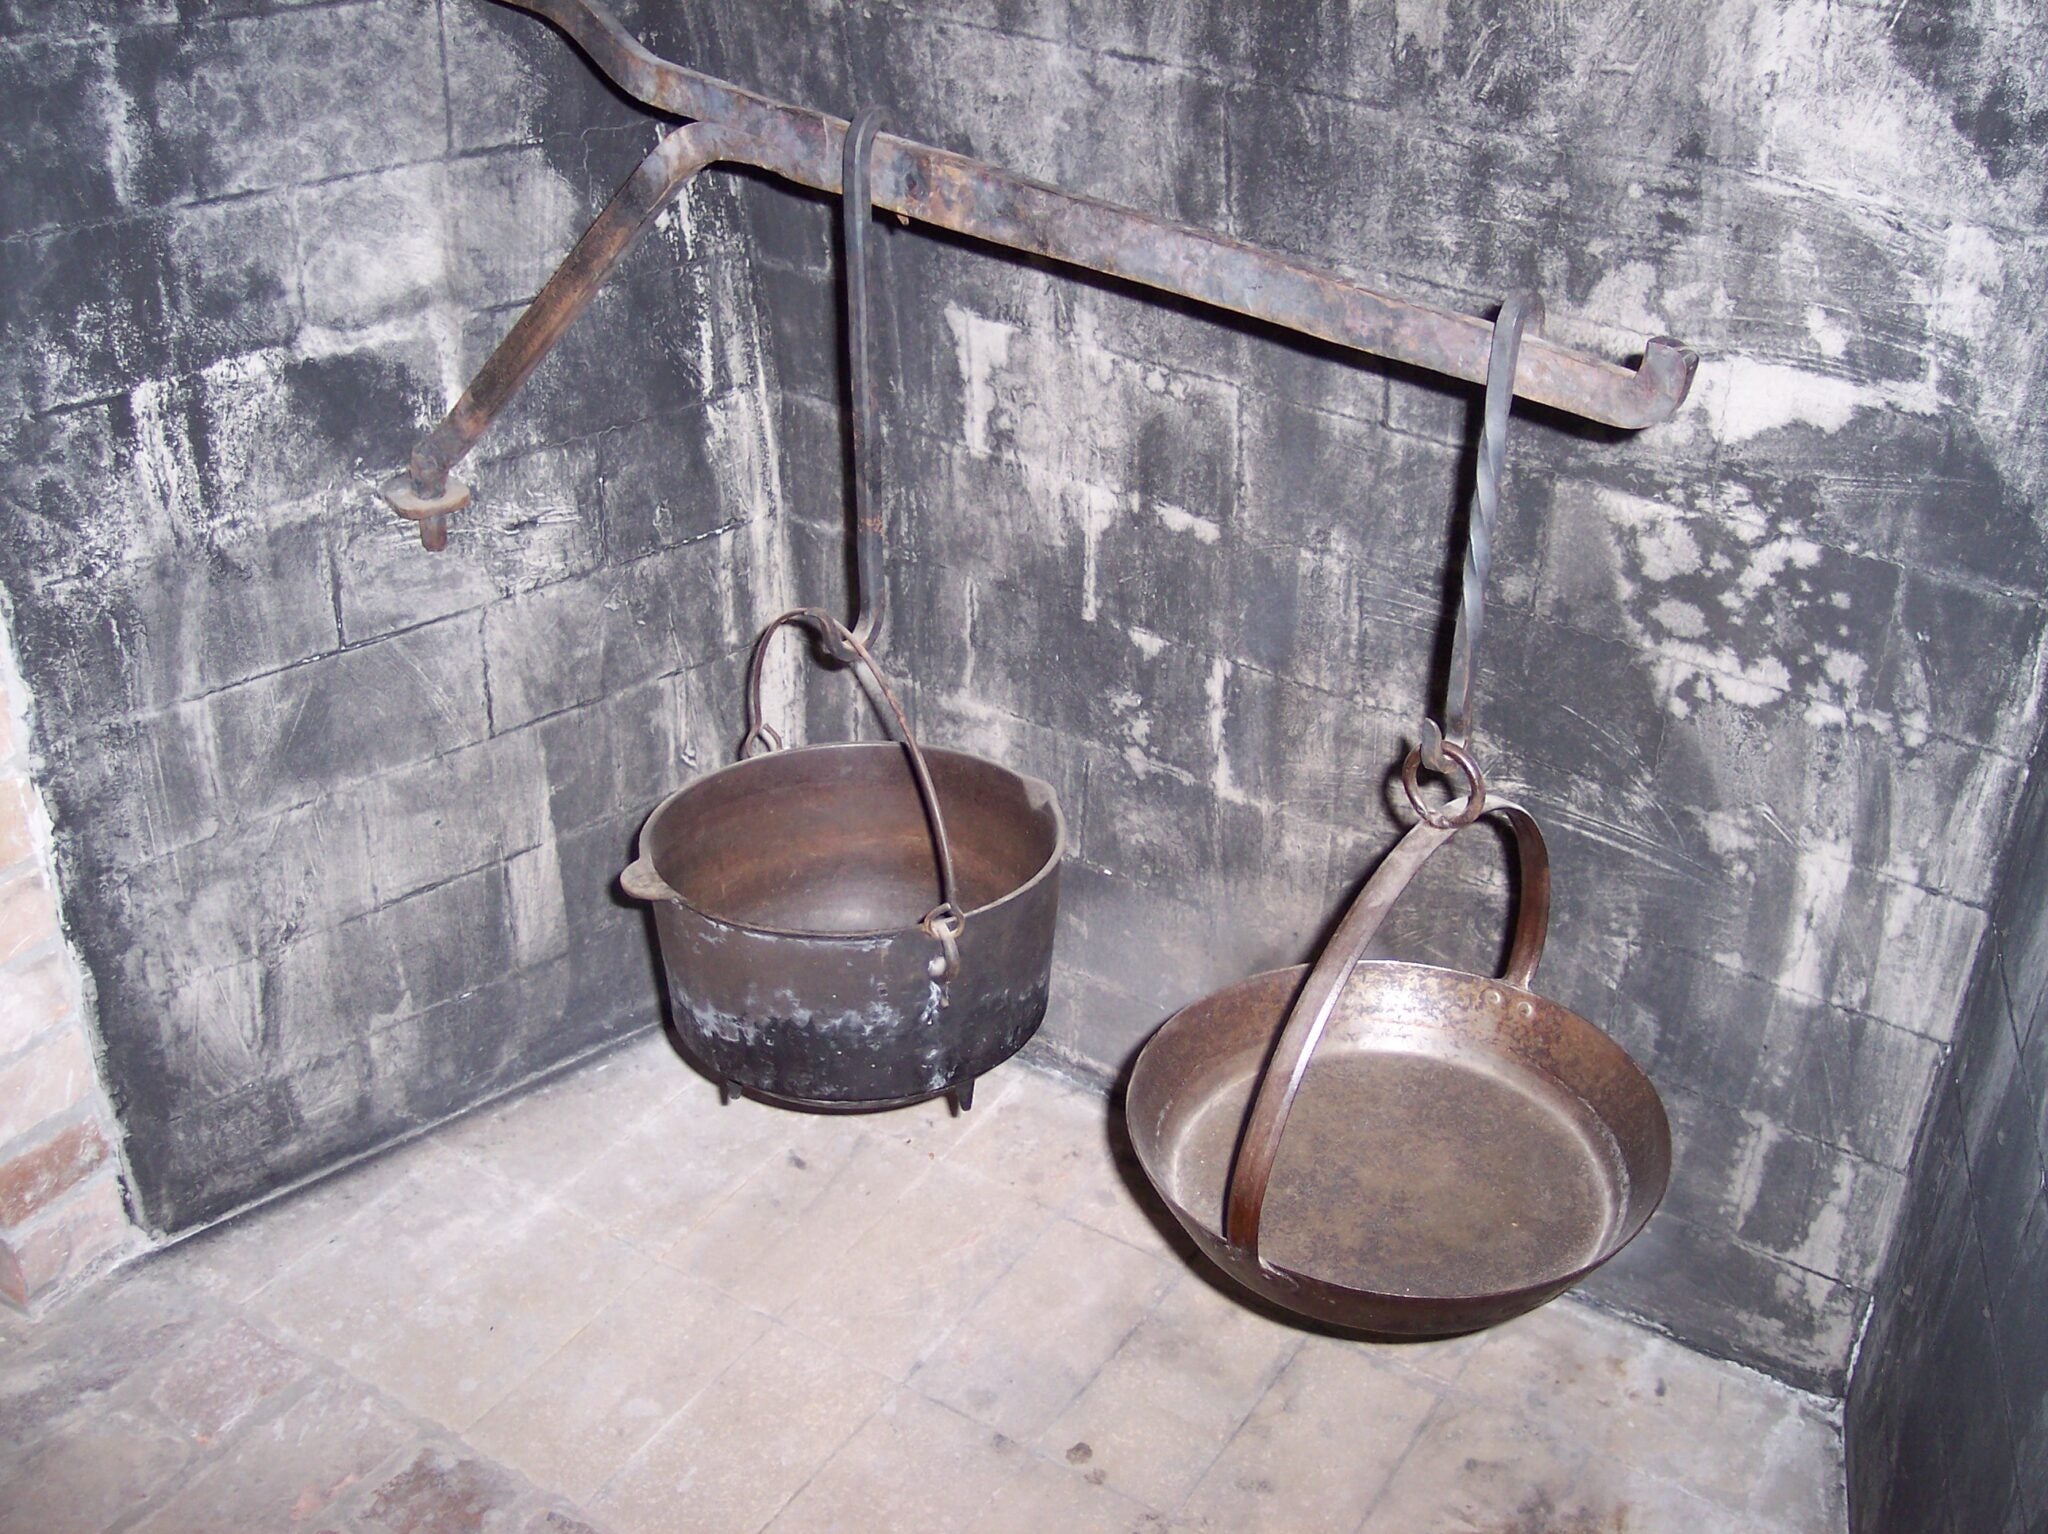 The view inside the open hearth fireplace, with brick covered in white ash, a cast iron cooking set hangs